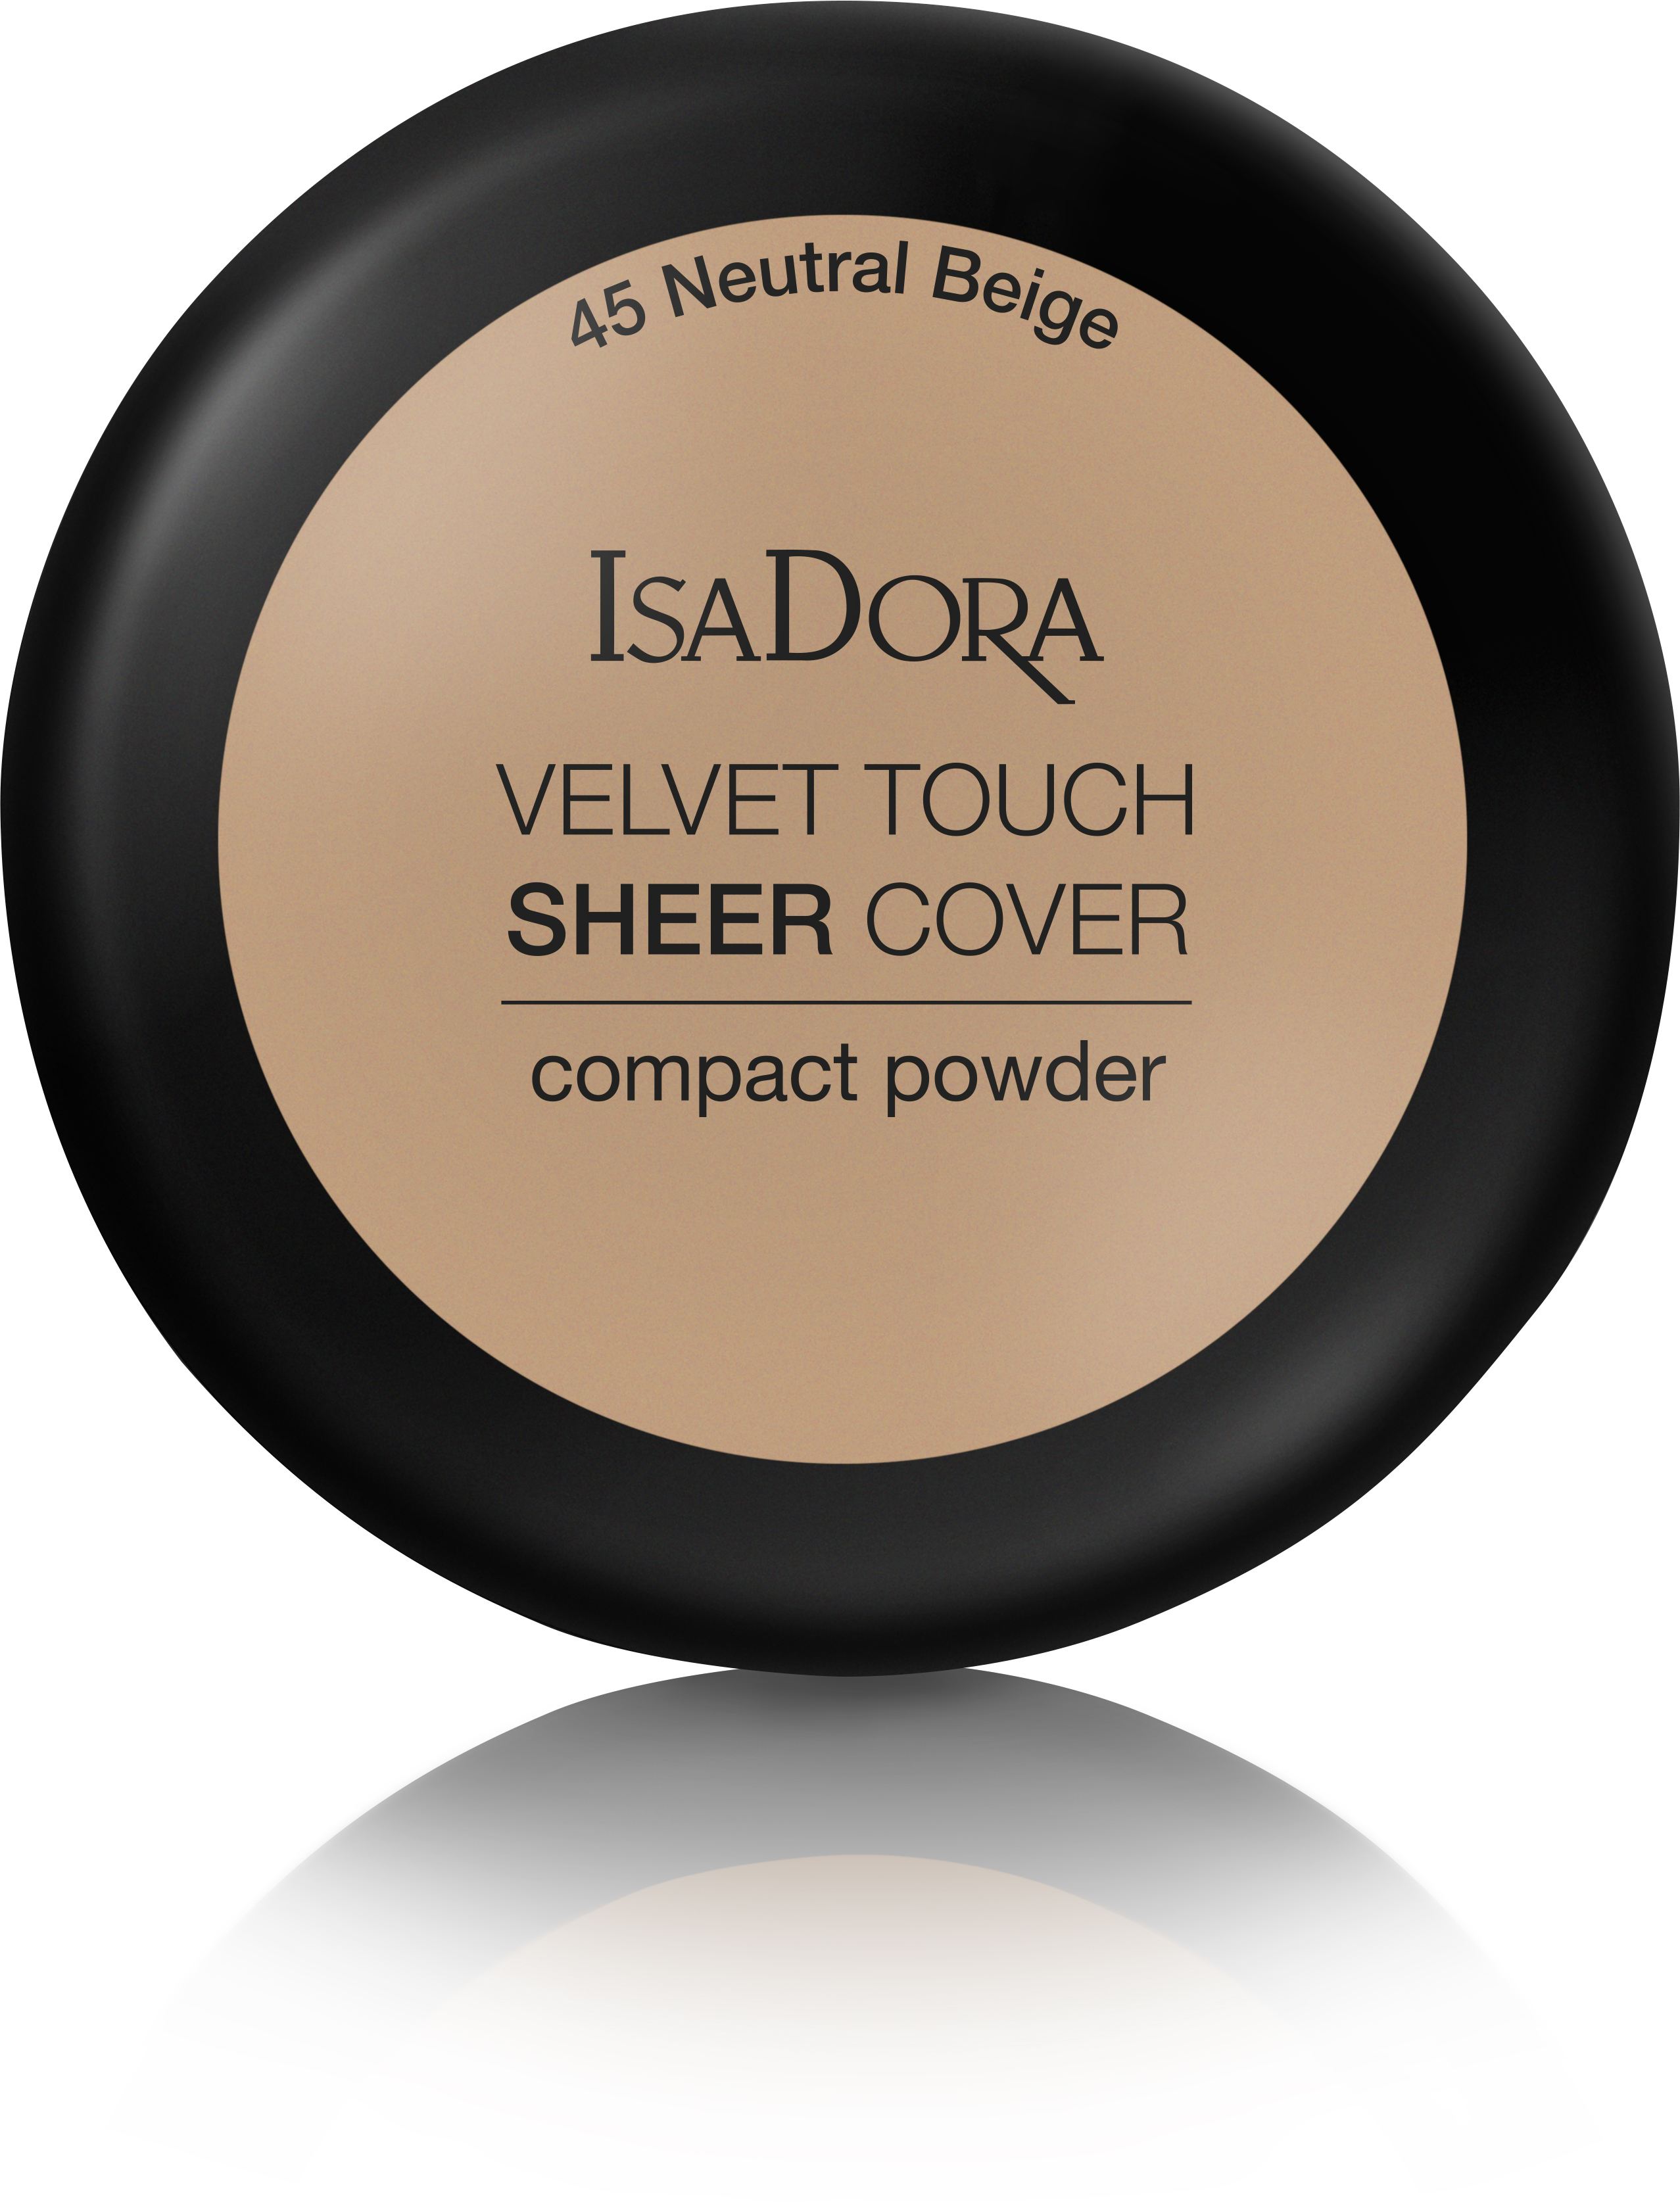 IsaDora 45 Neutral Beige Velvet Touch Sheer Cover Compact